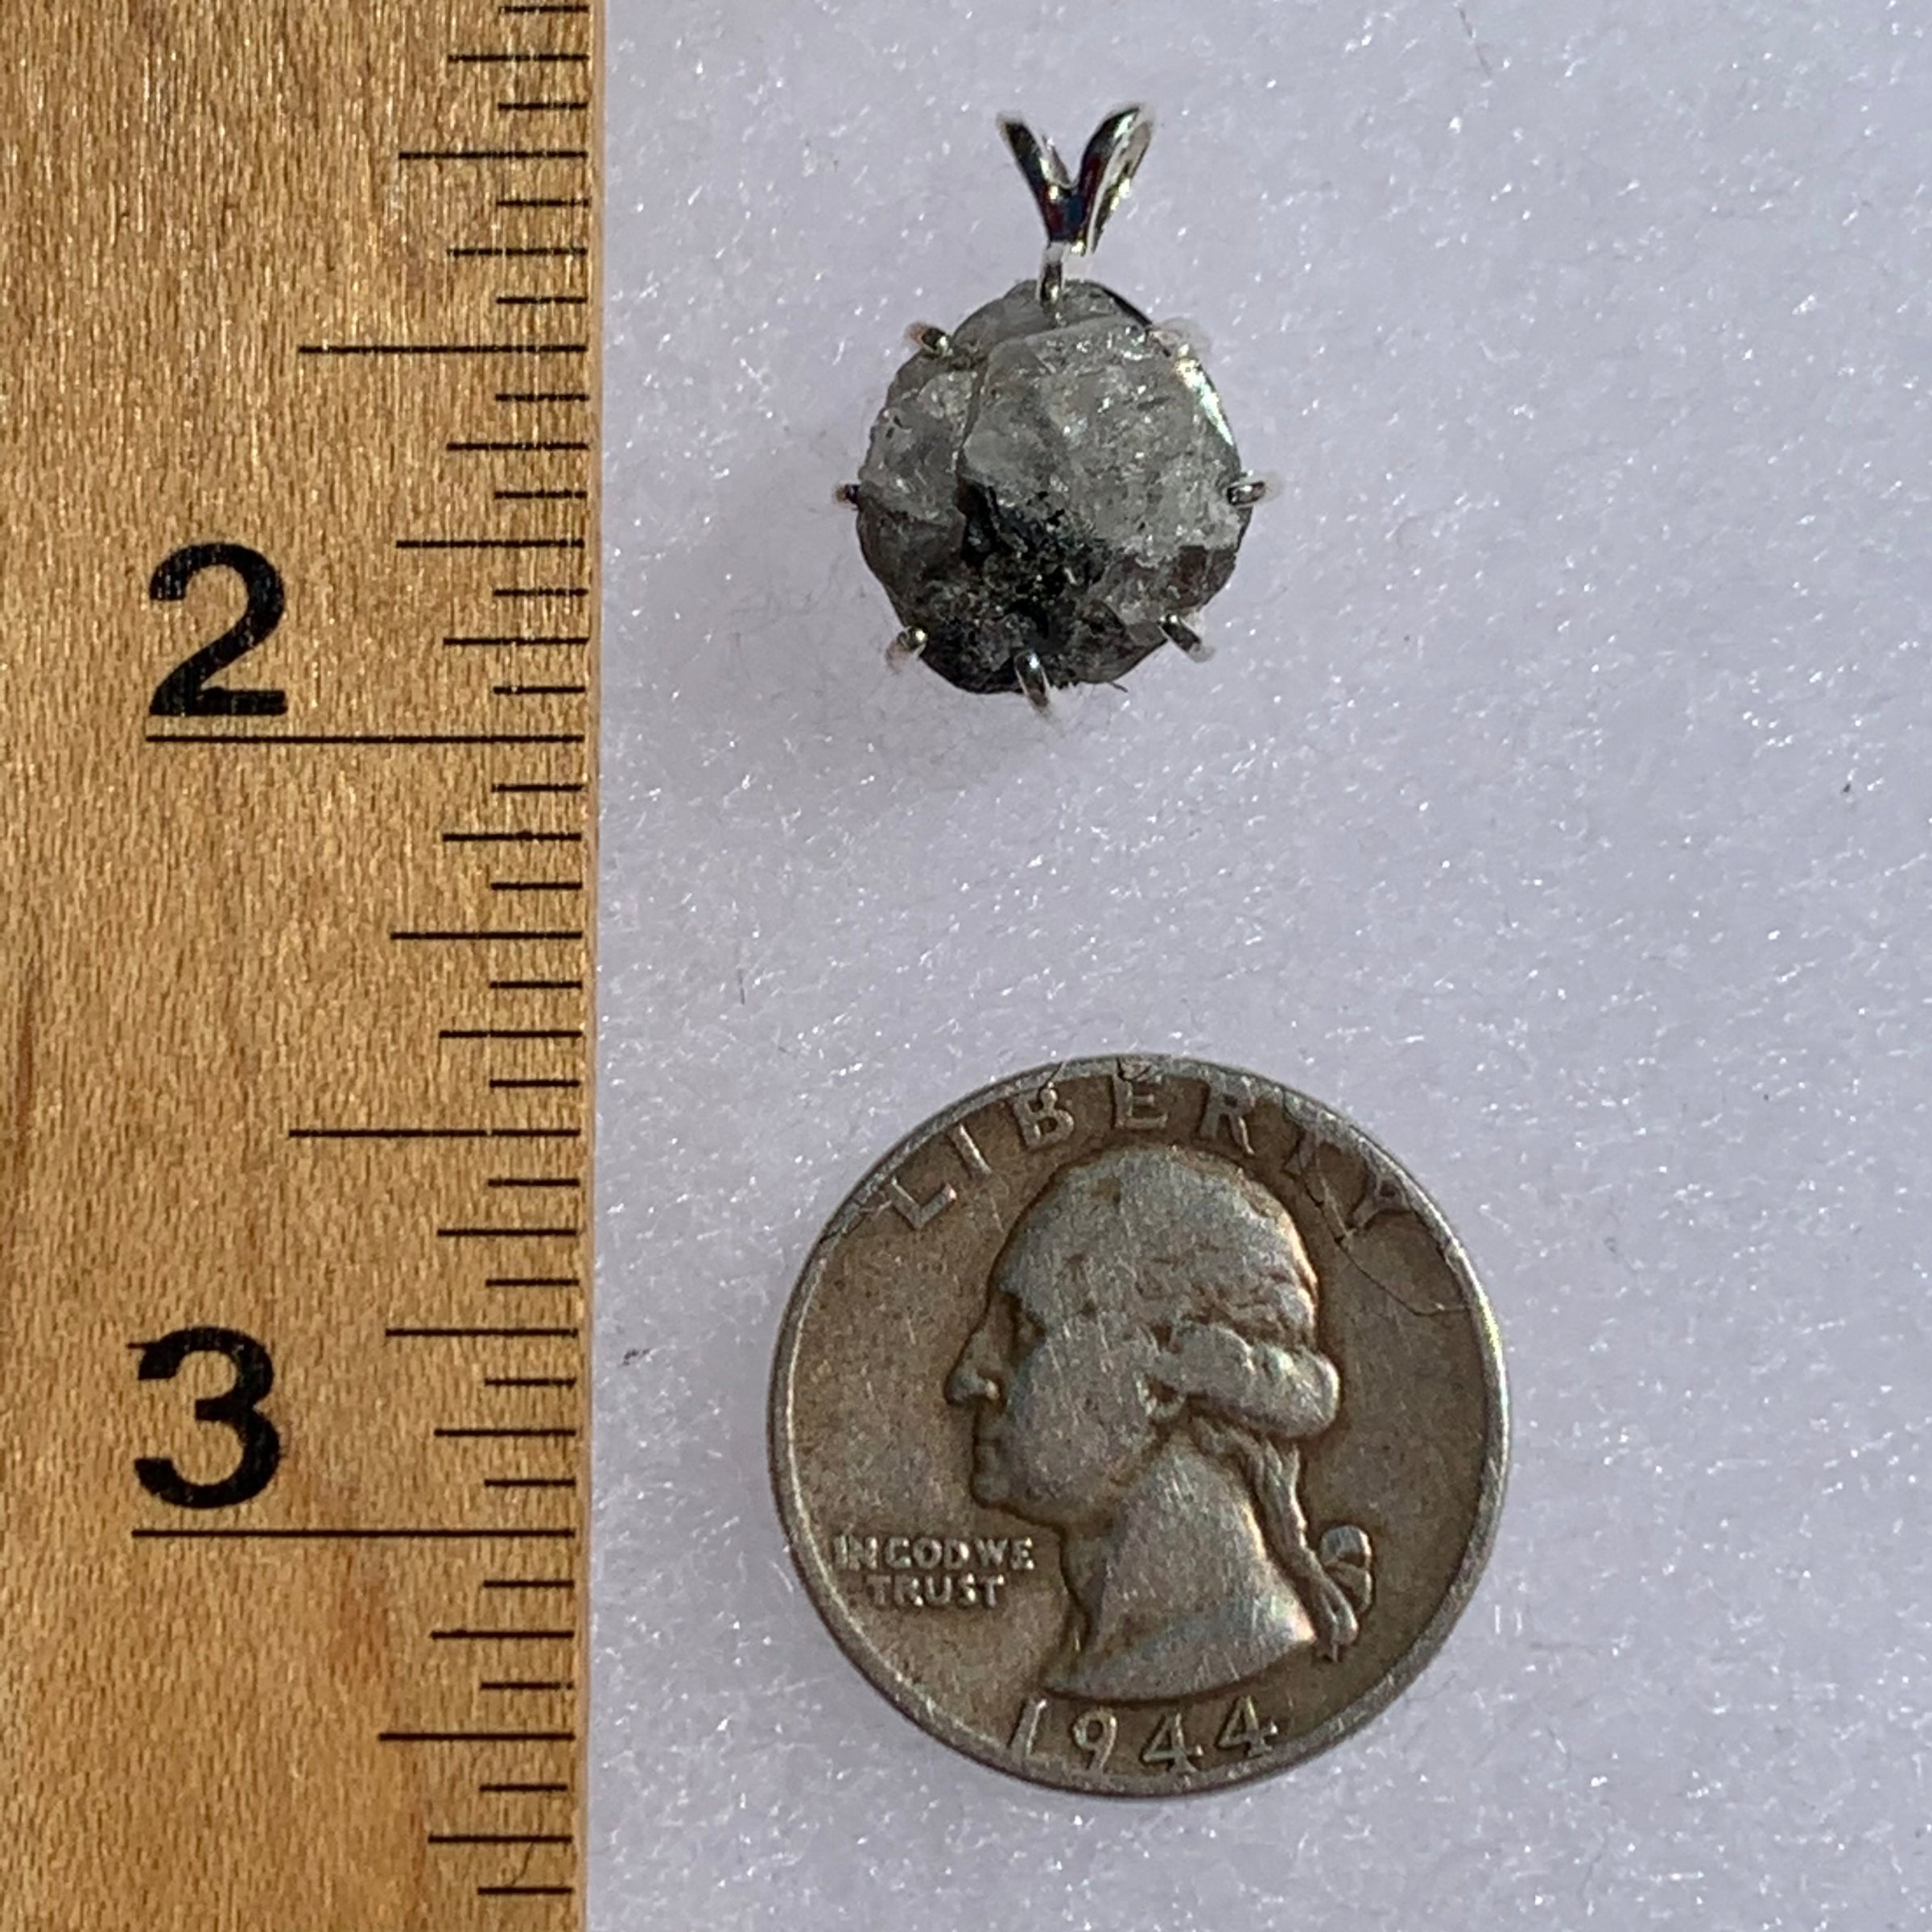 sterling silver Russian phenacite basket pendant next to a ruler and US quarter for scale